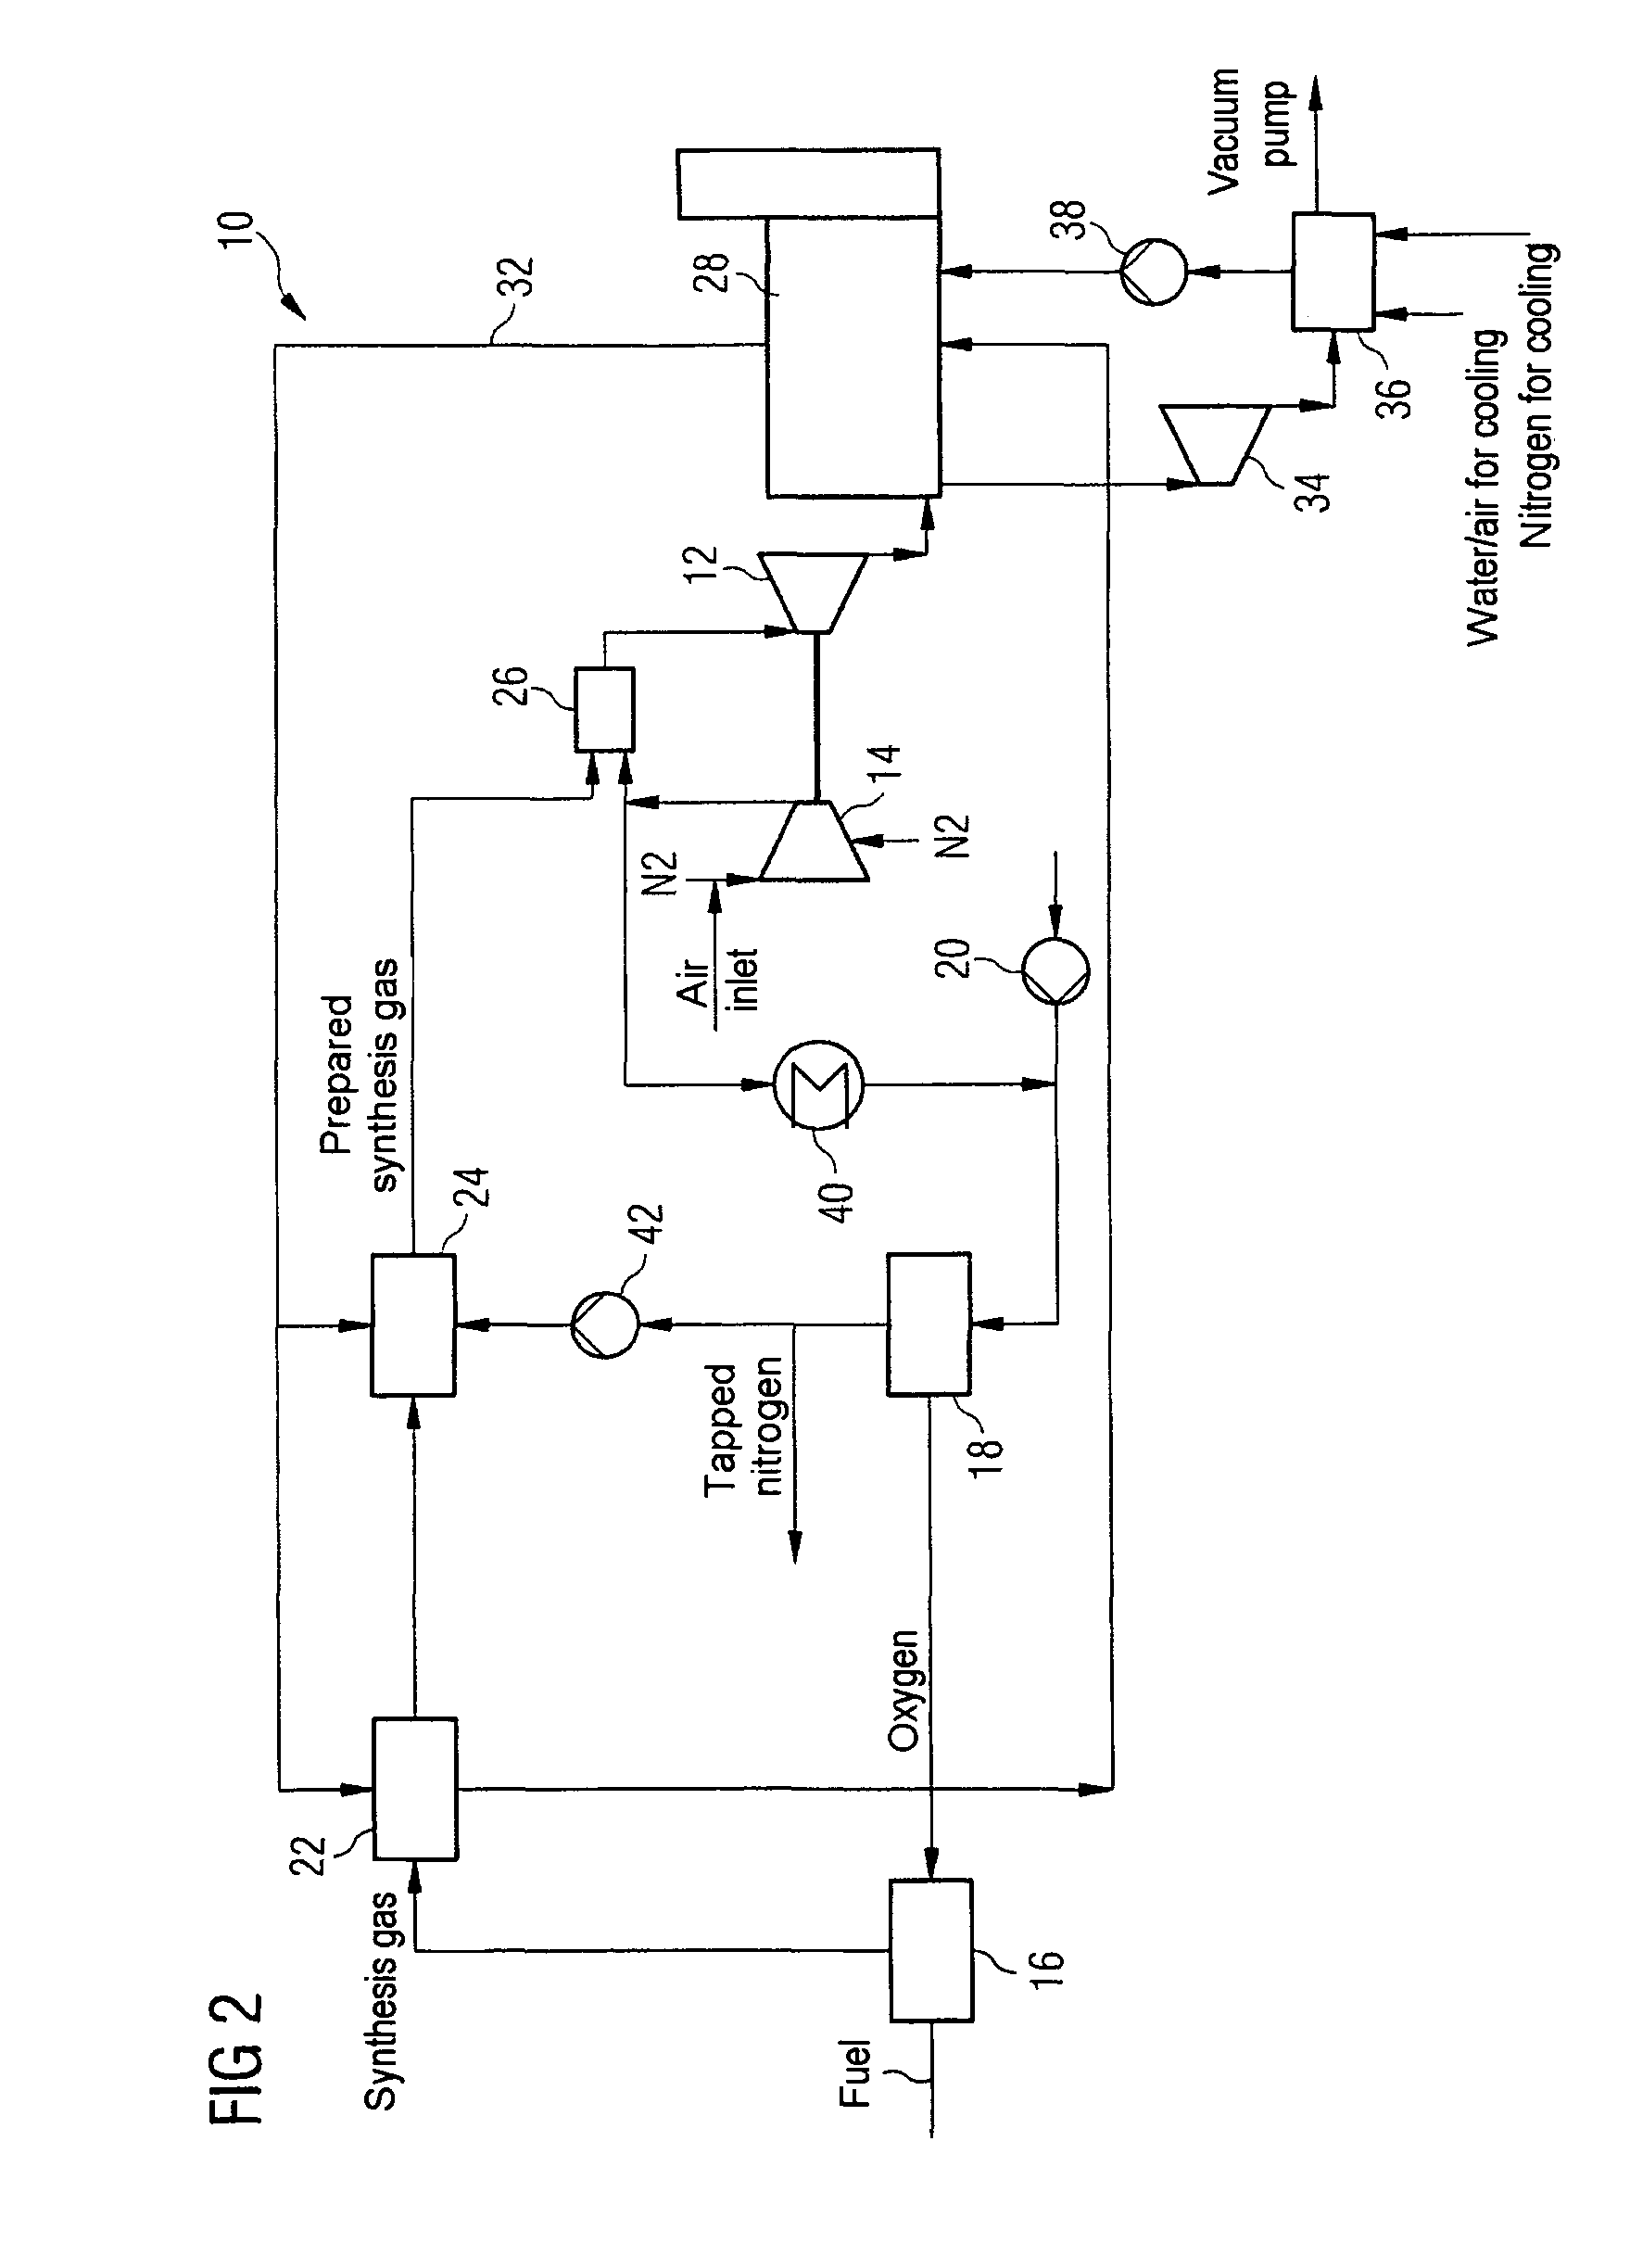 Method for increasing the efficiency of a combined gas/steam power station with integrated gasification combined cycle